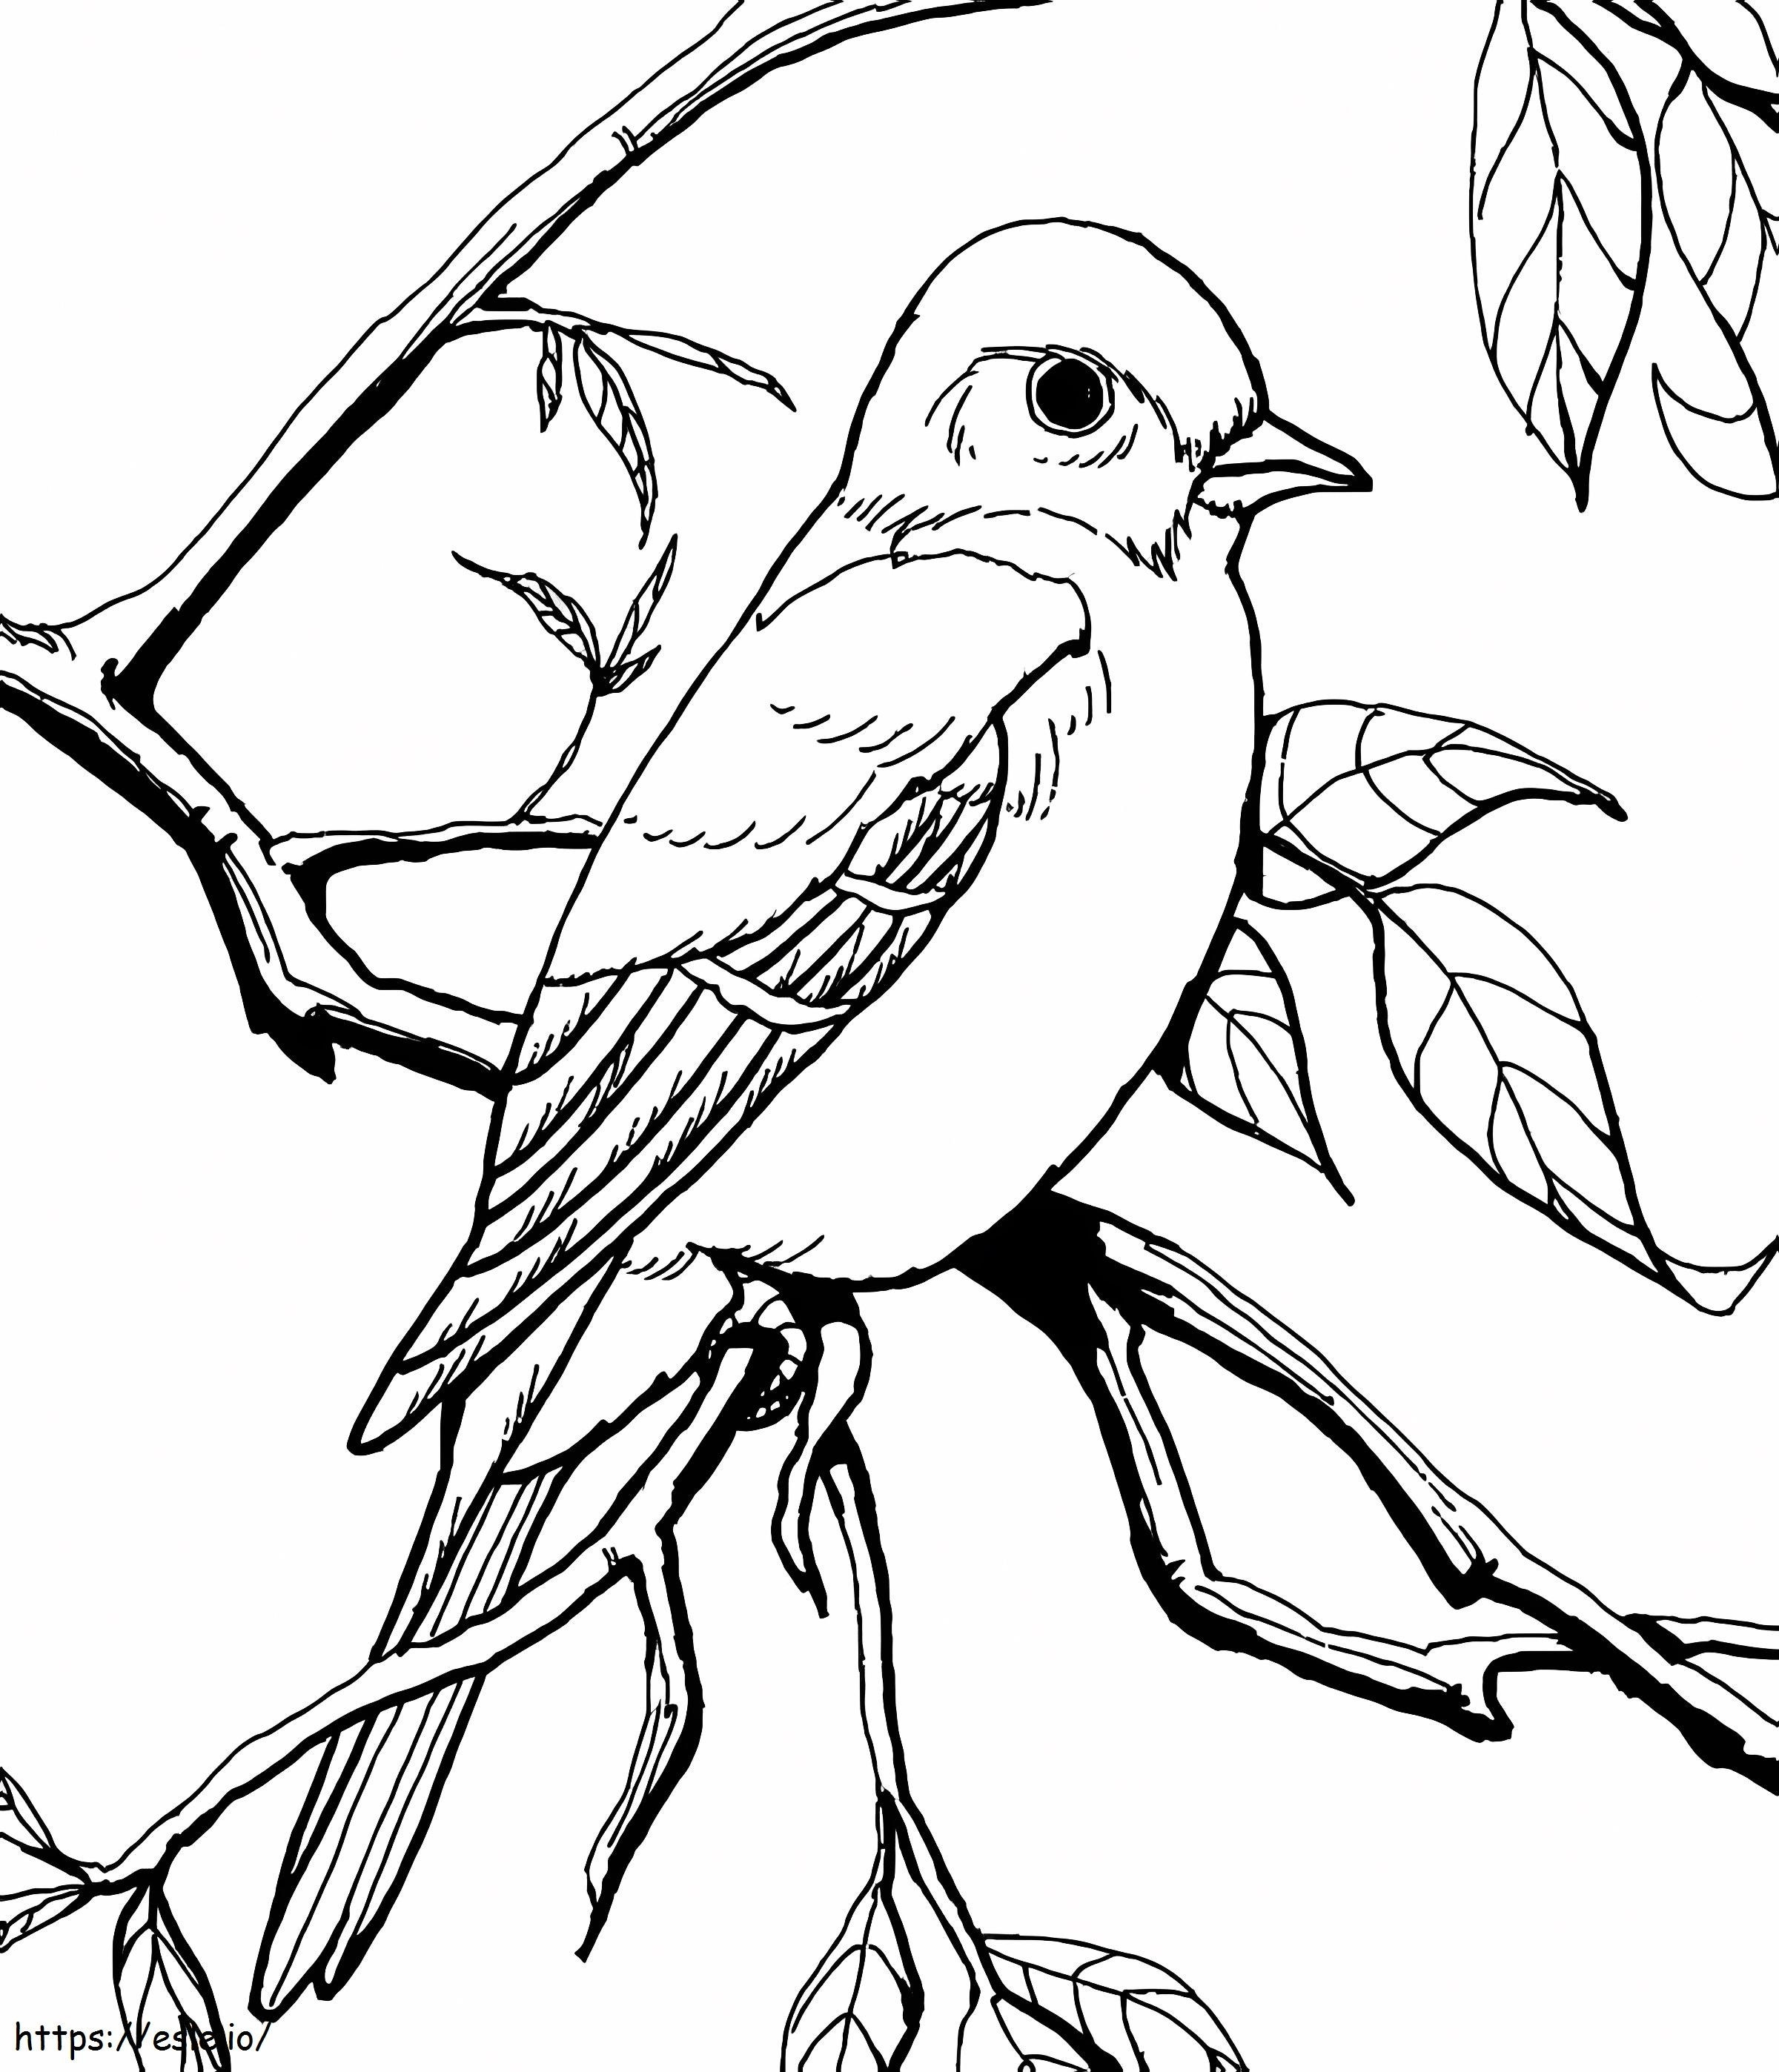 Texas Nightingale coloring page